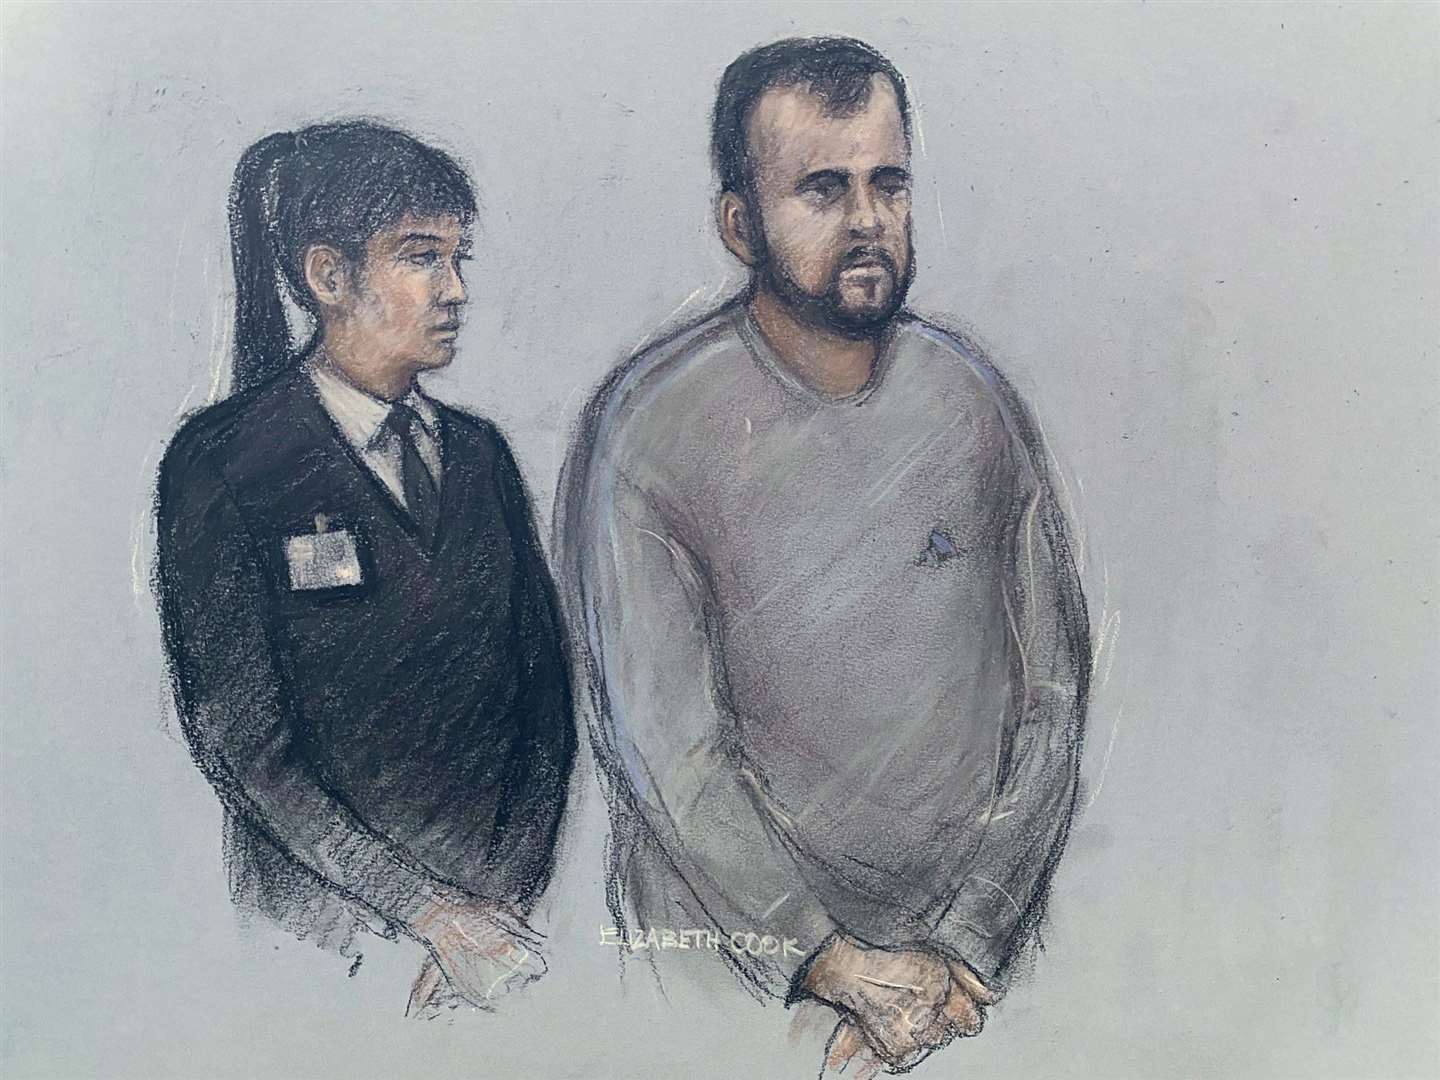 Court artist sketch of Joby Pool appearing in the dock at Telford Magistrates’ Court (Elizabeth Cook/PA)